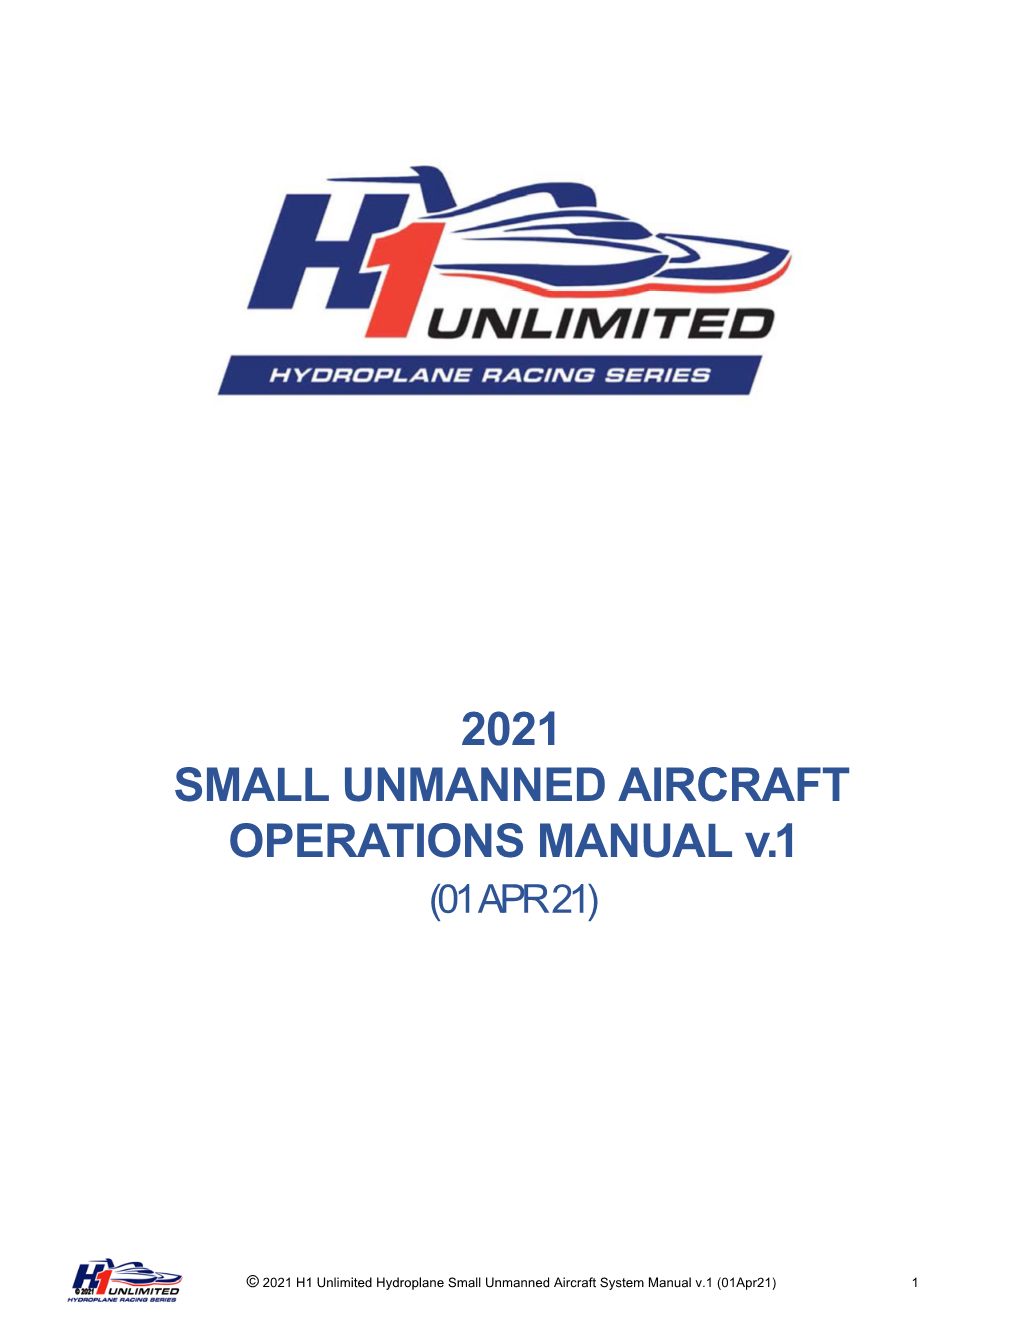 2021 SMALL UNMANNED AIRCRAFT OPERATIONS MANUAL V.1 (01 APR 21)